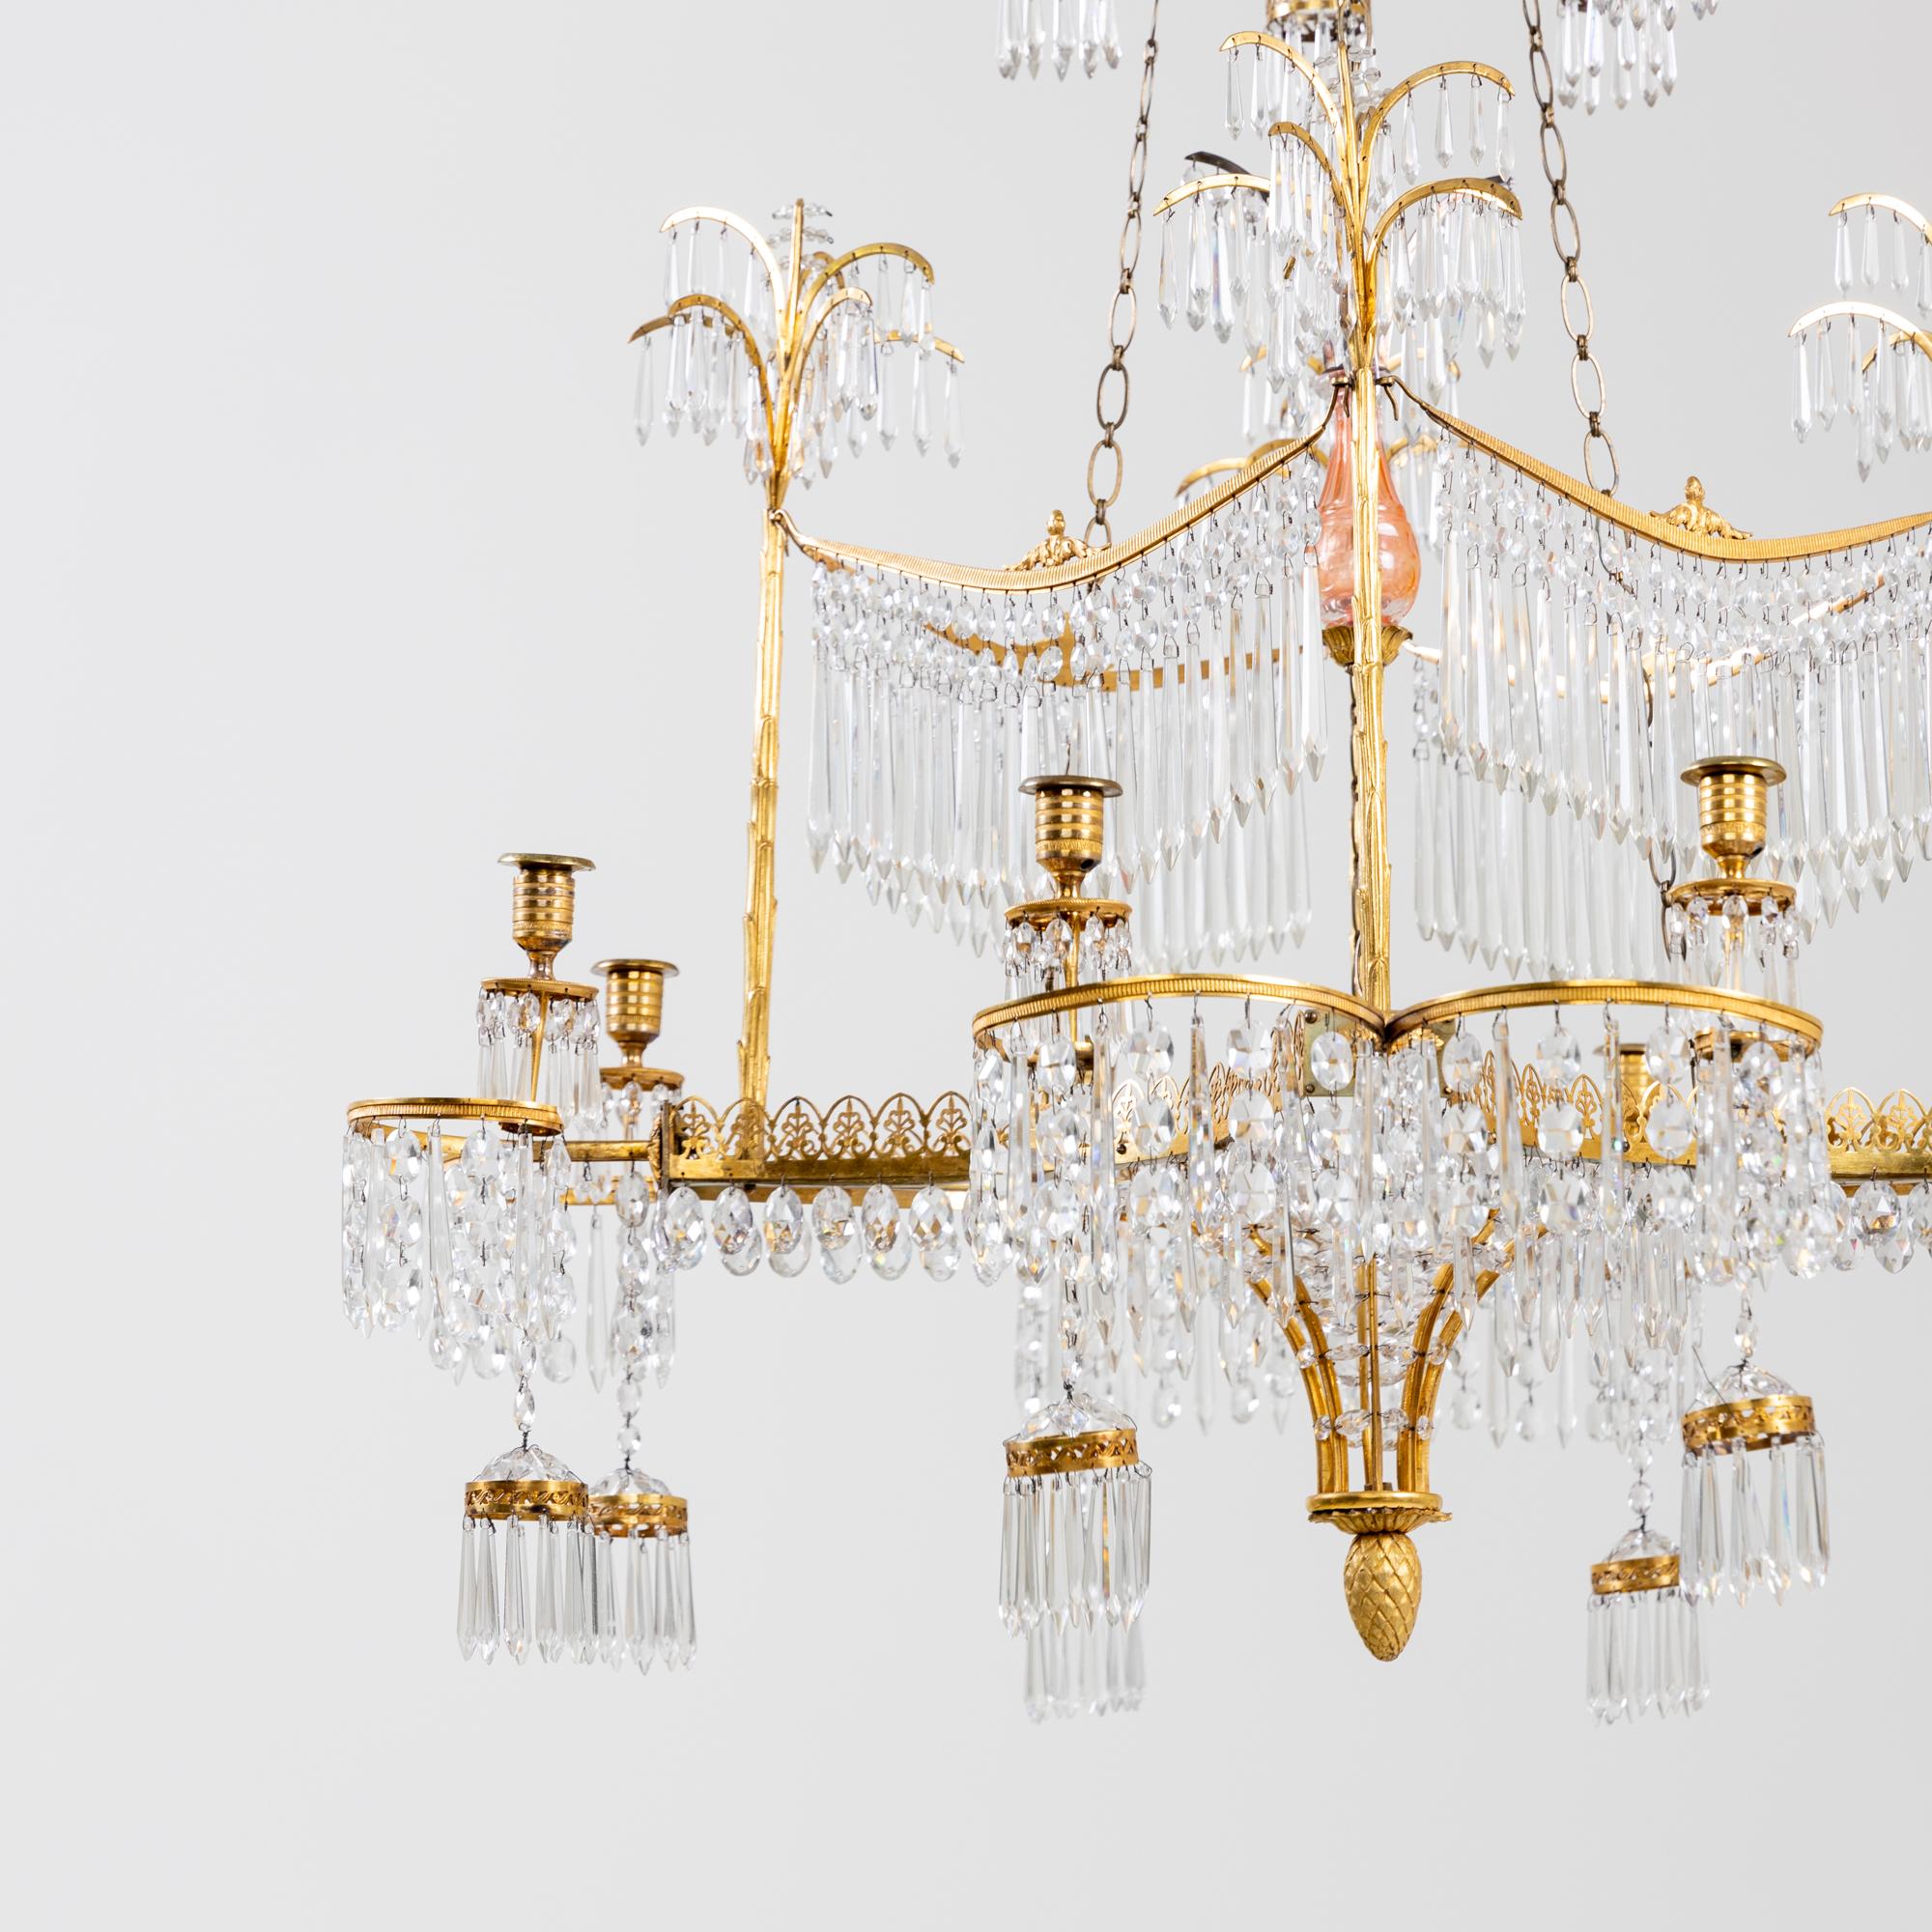 Neoclassical Chandelier with Palm Trees, Werner & Mieth, Berlin c. 1800-1810 For Sale